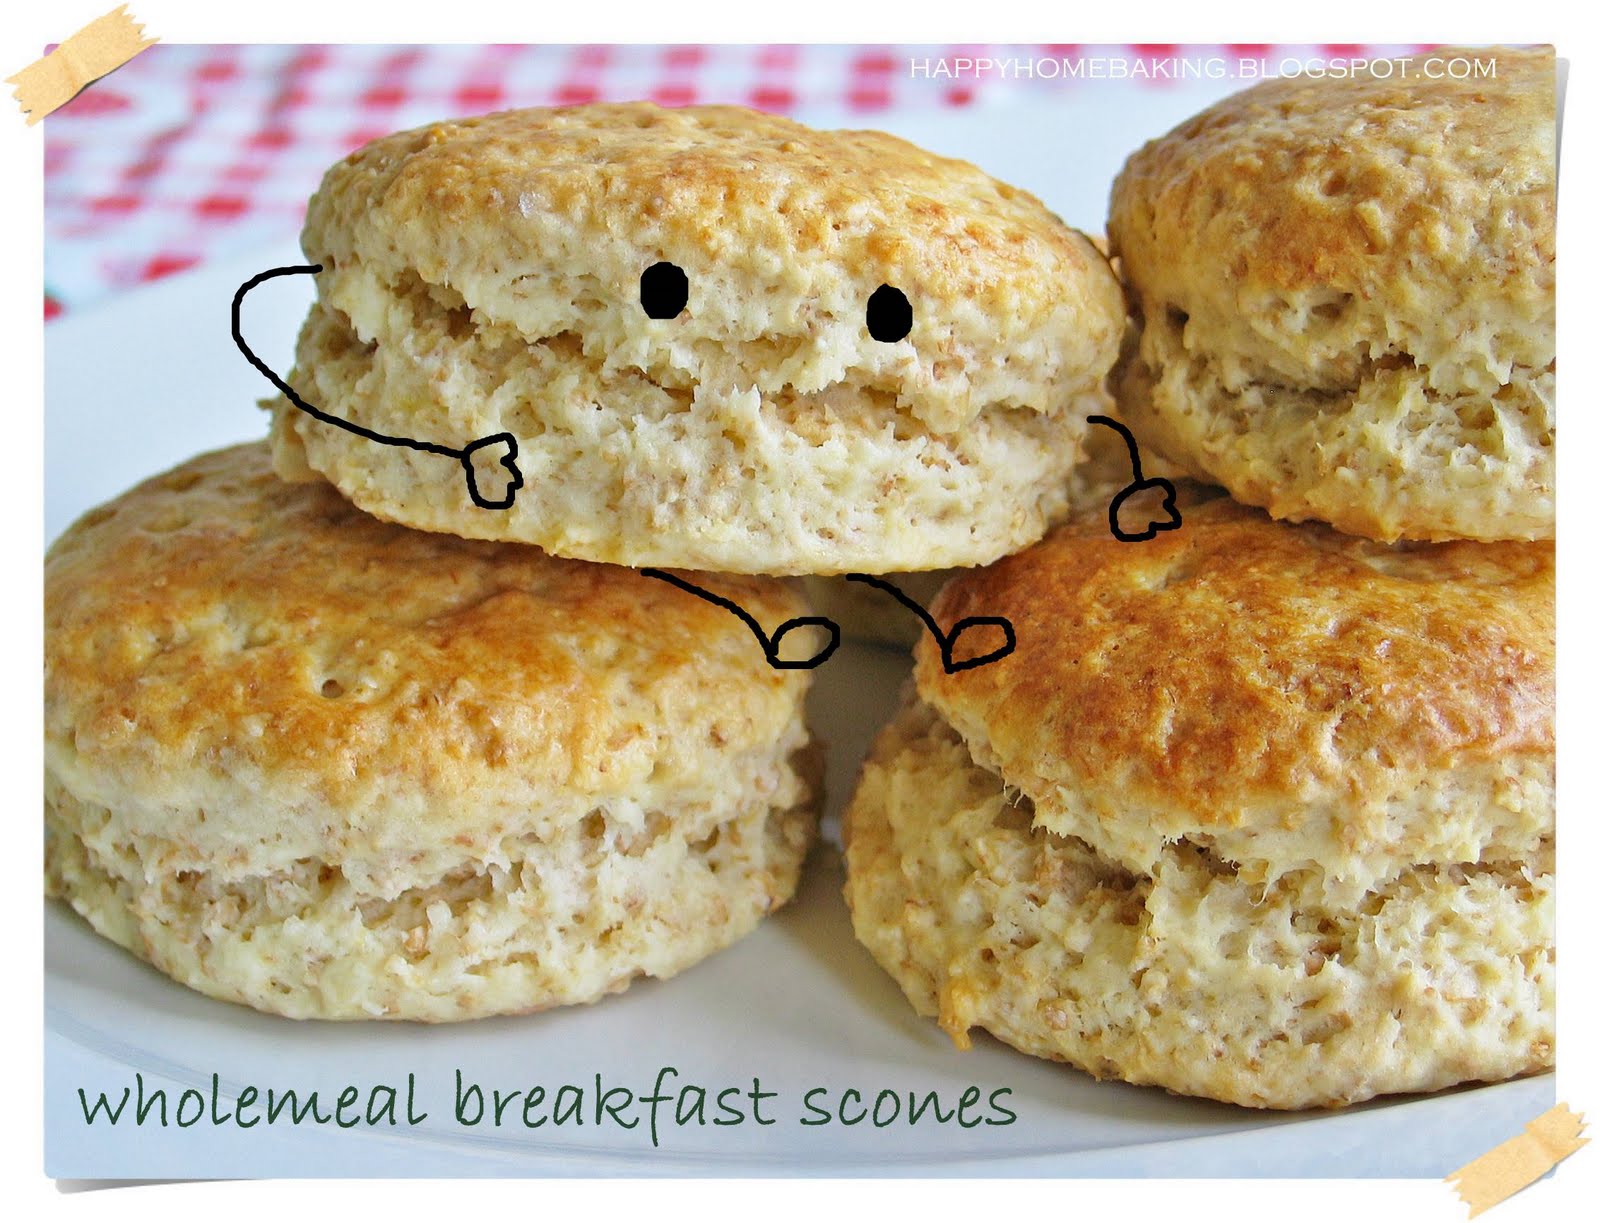 Happy Home Baking: for the love of scones